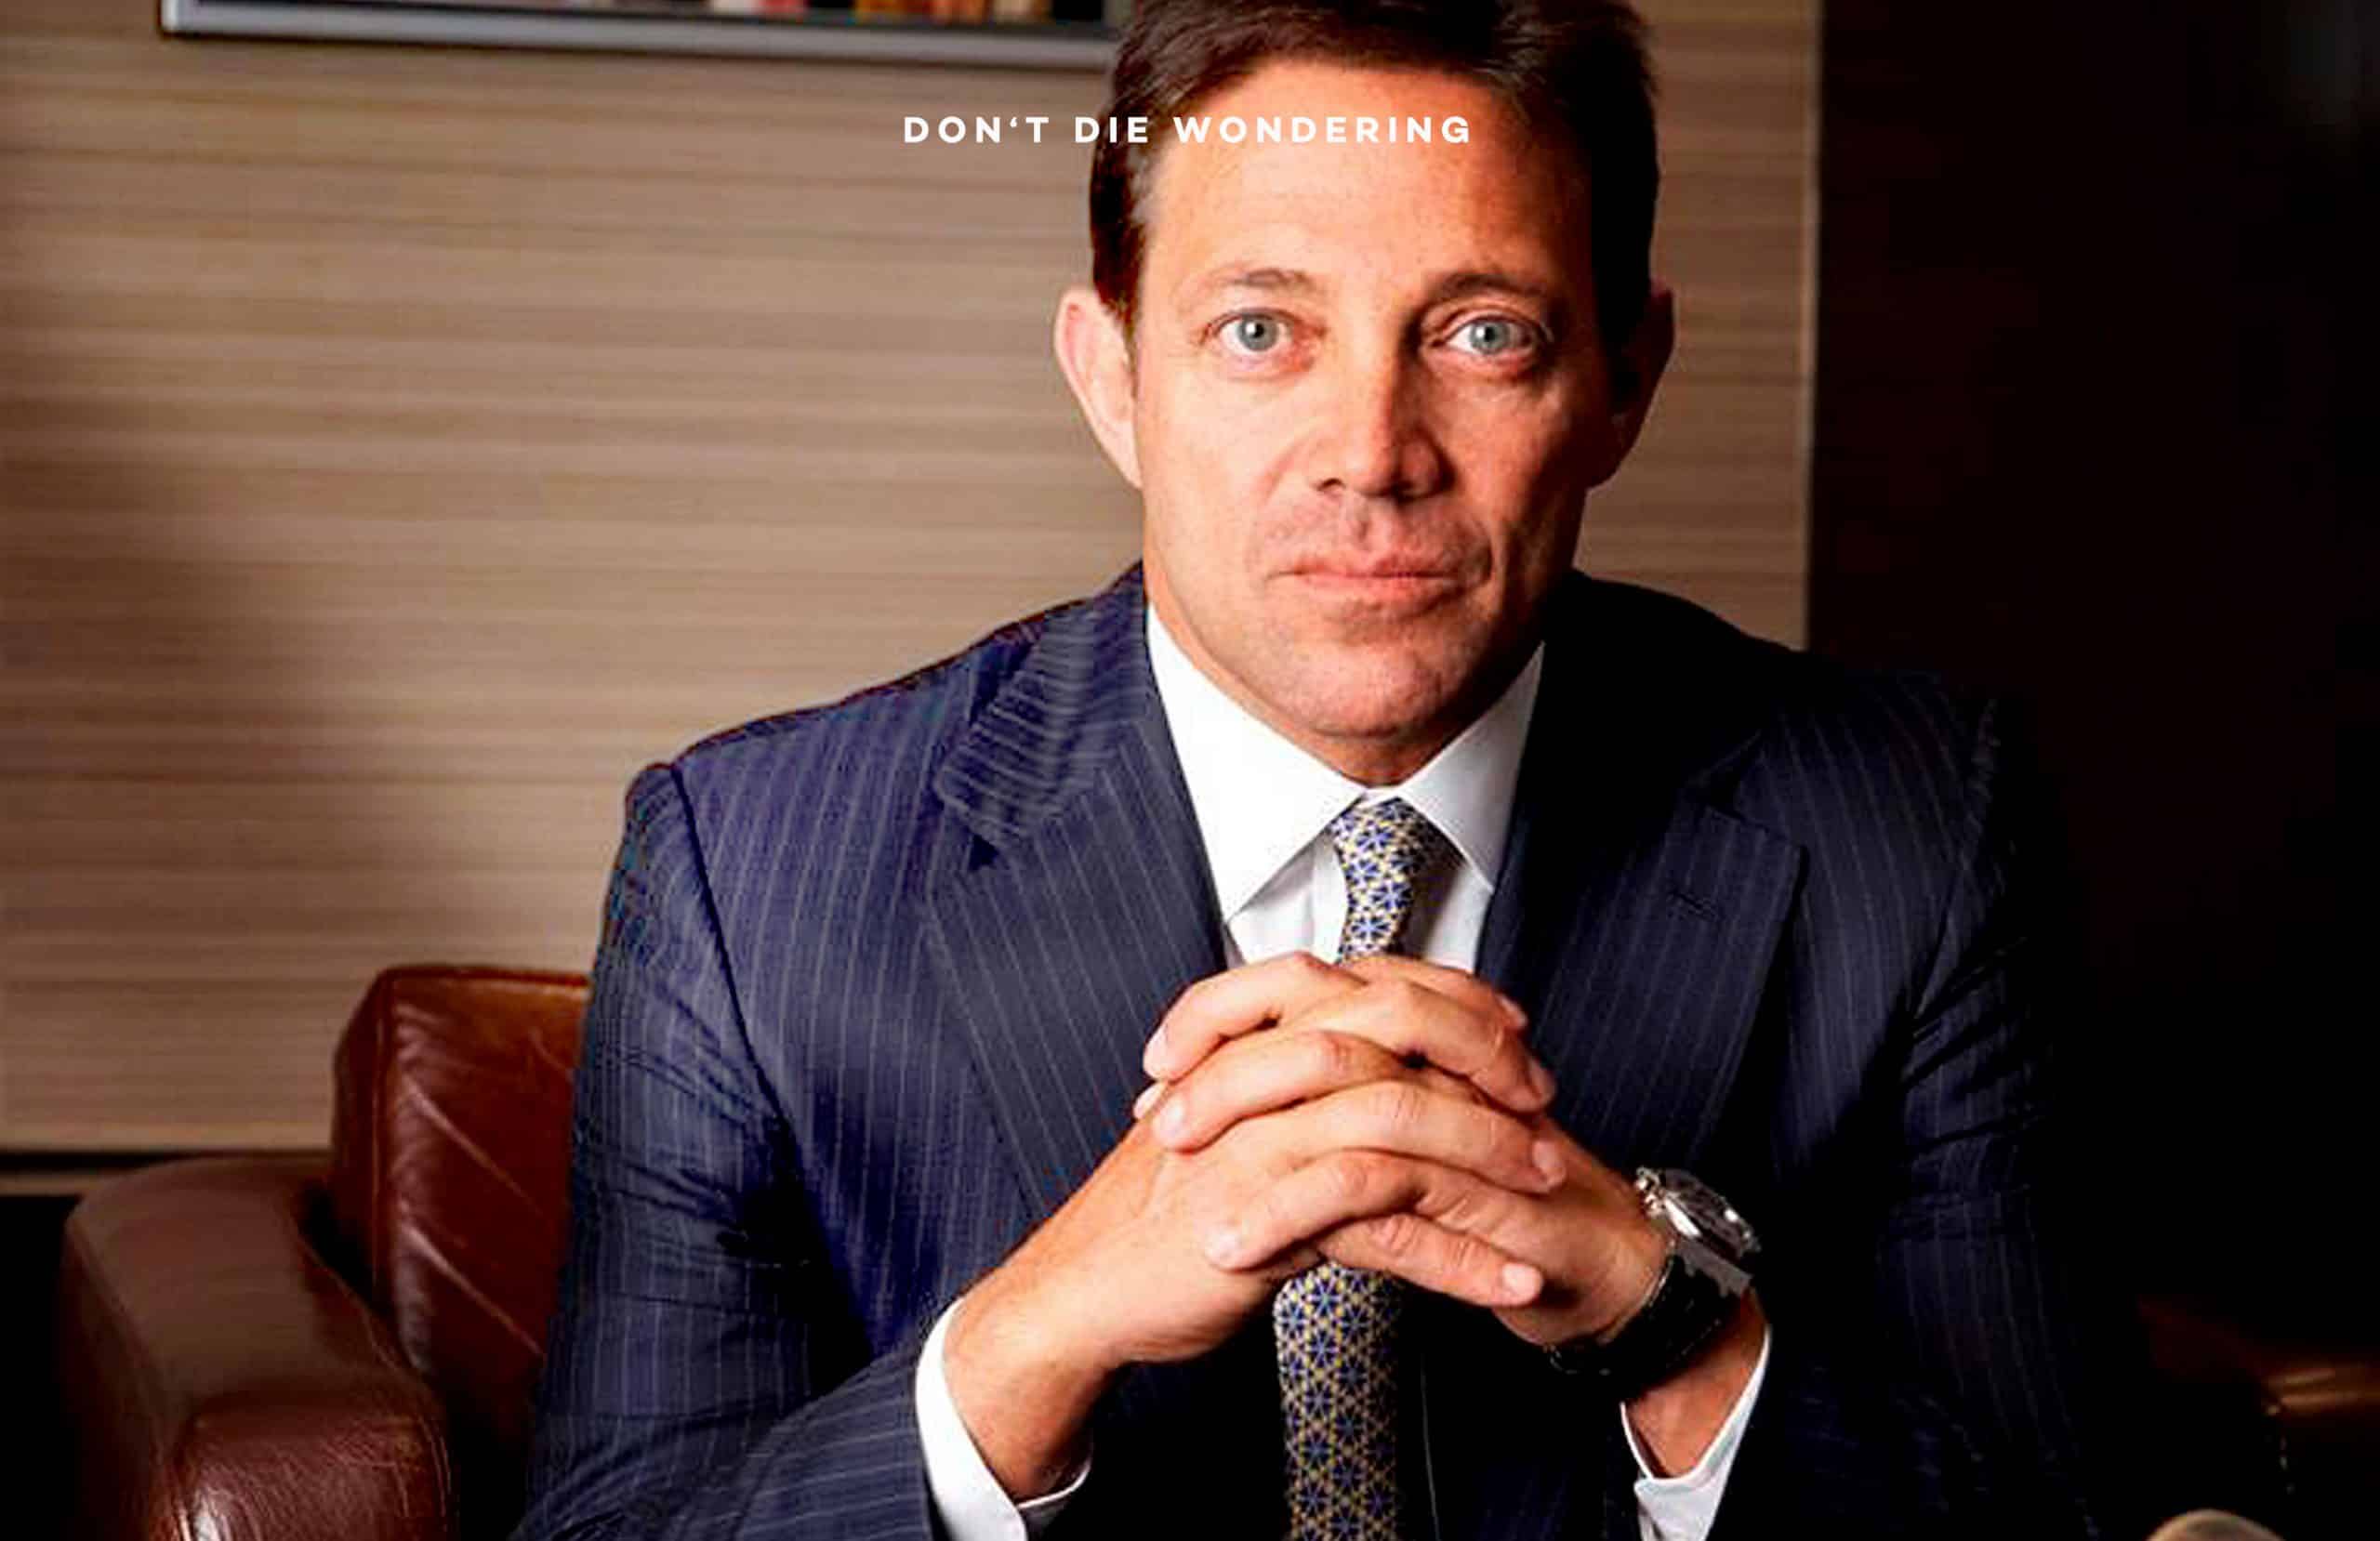 The Wolf Of Wall Street Where Is The Real Jordan Belfort Now? DDW